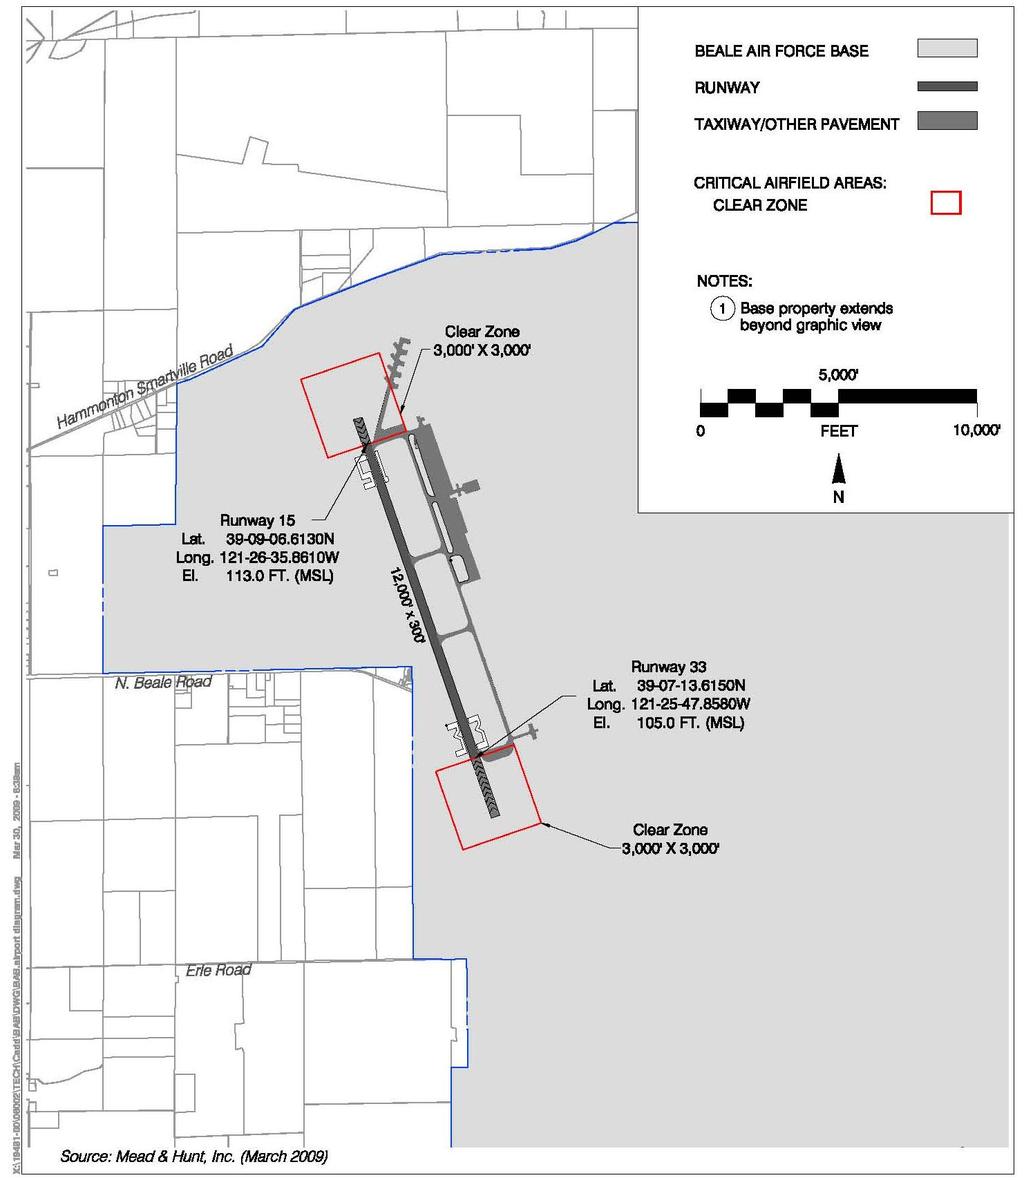 BACKGROUND DATA: BEALE AFB AND ENVIRONS CHAPTER 3 Exhibit 2 Simplified Airport Diagram